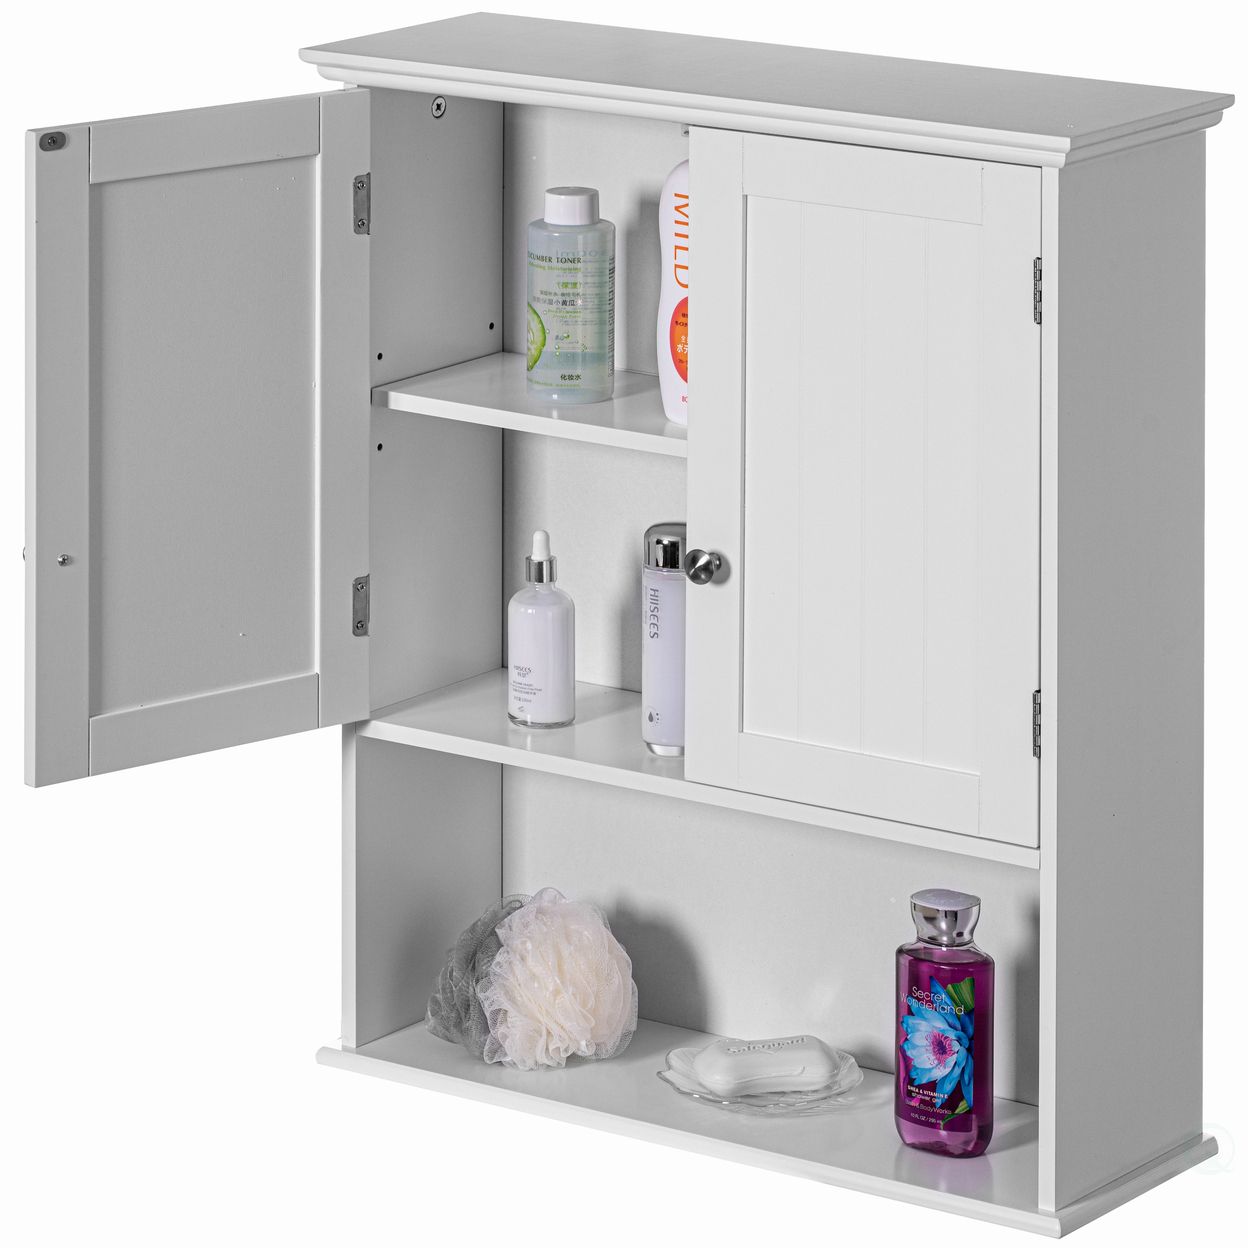 Wall Mount Bathroom Cabinet Wooden Medicine Cabinet Storage Organizer Double Door With 2 Shelves, And Open Display Shelf - White